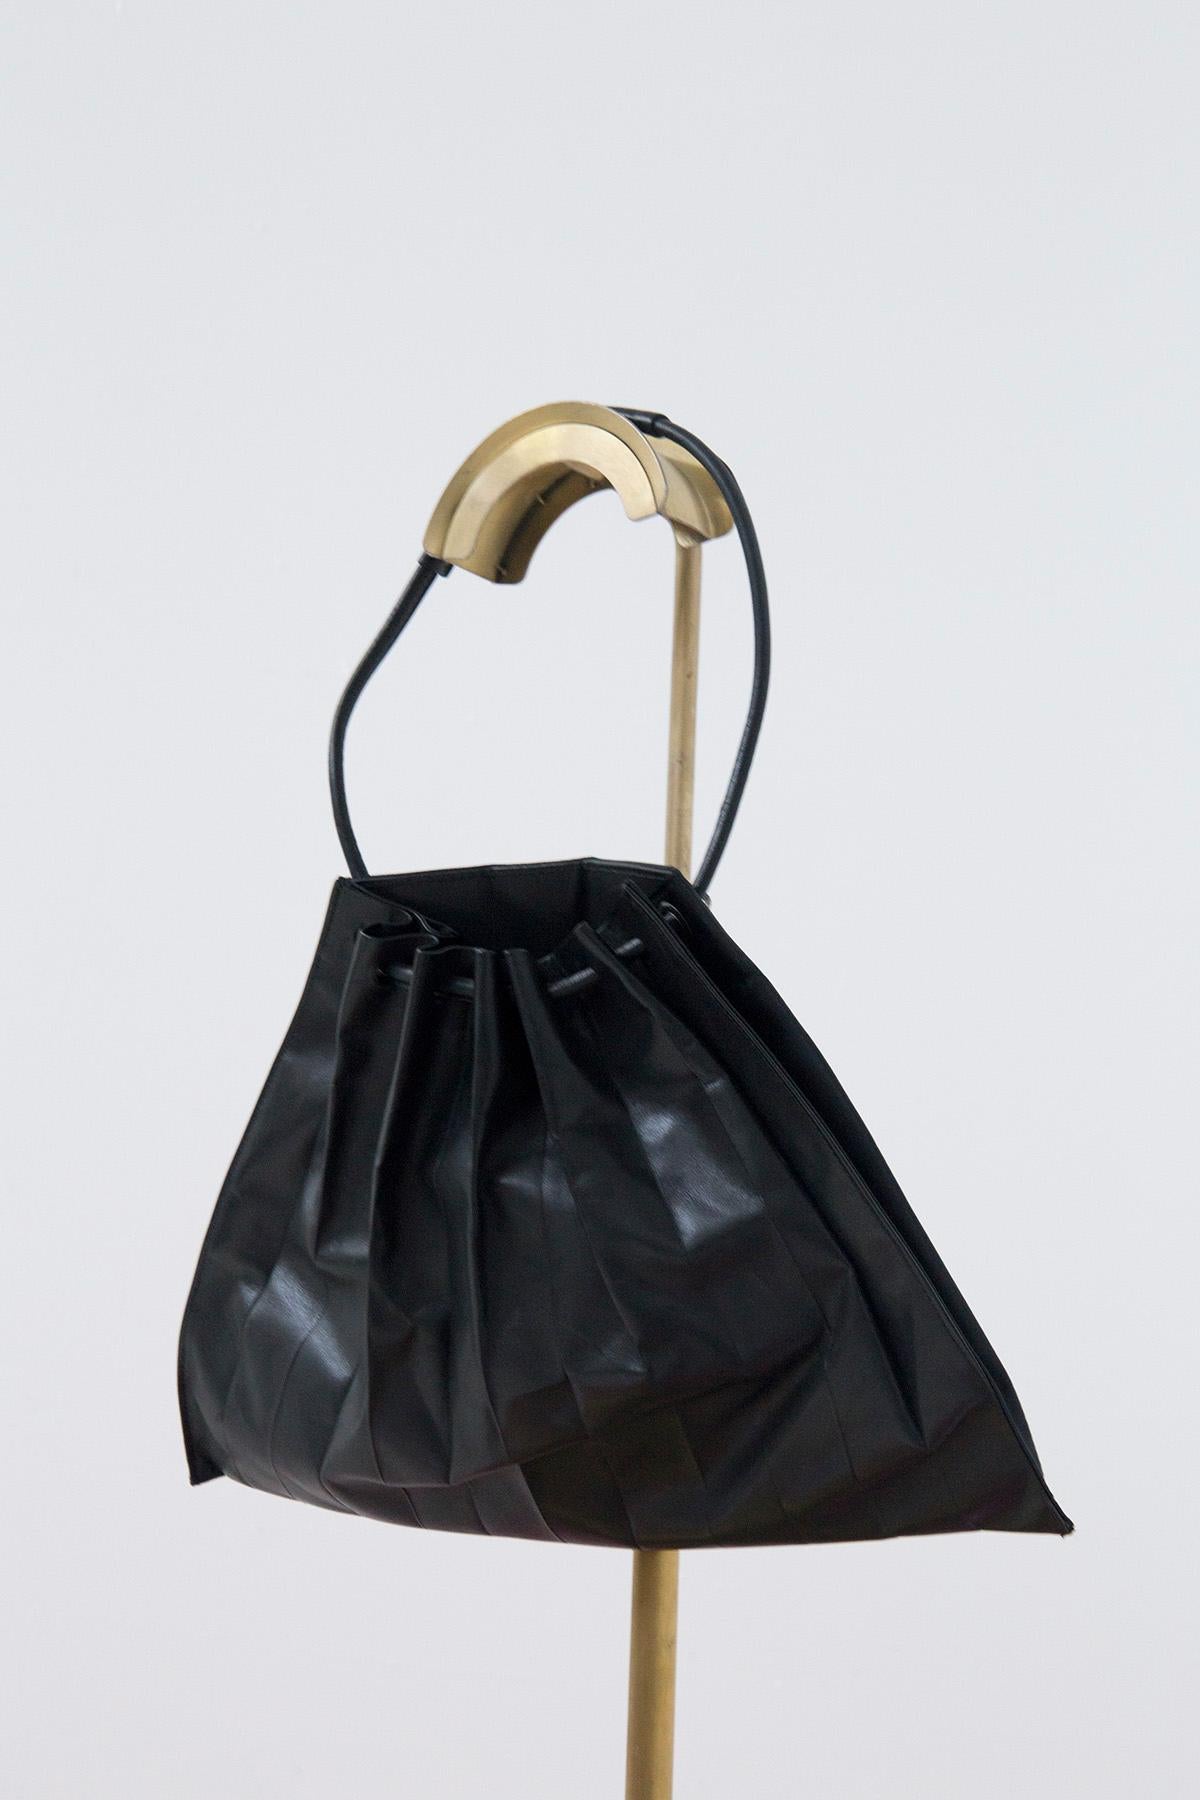 MIYAKE ISSEY Pleated Black Leather Bag For Sale 5